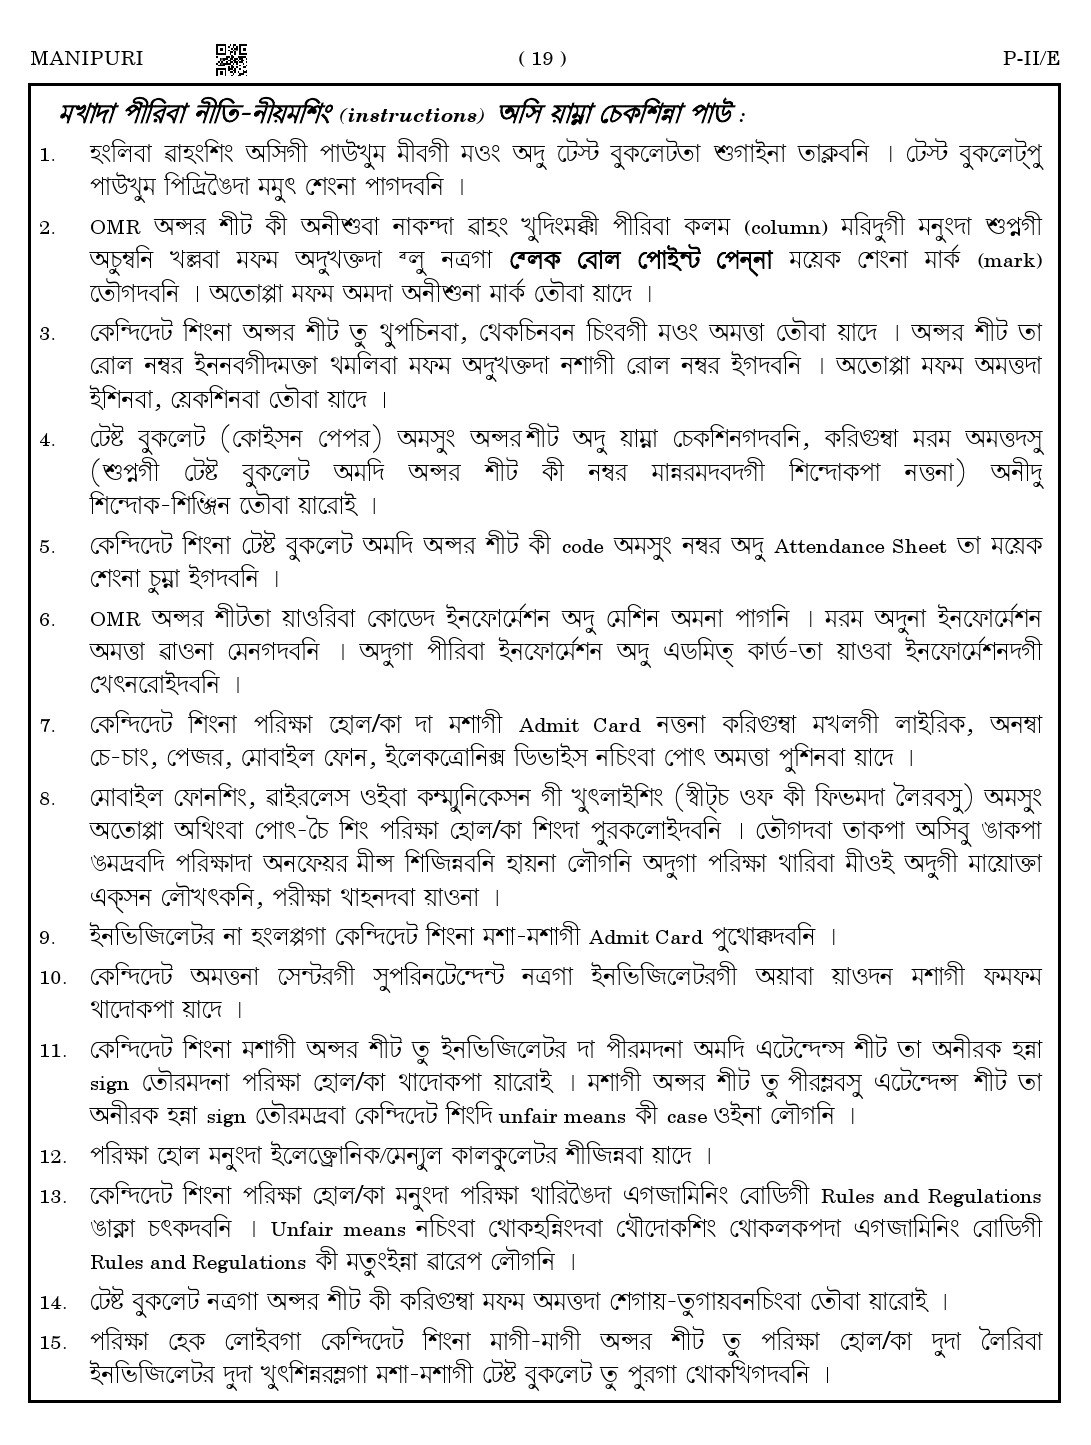 CTET August 2023 Manipuri Language Supplement Paper II Part IV and V 17